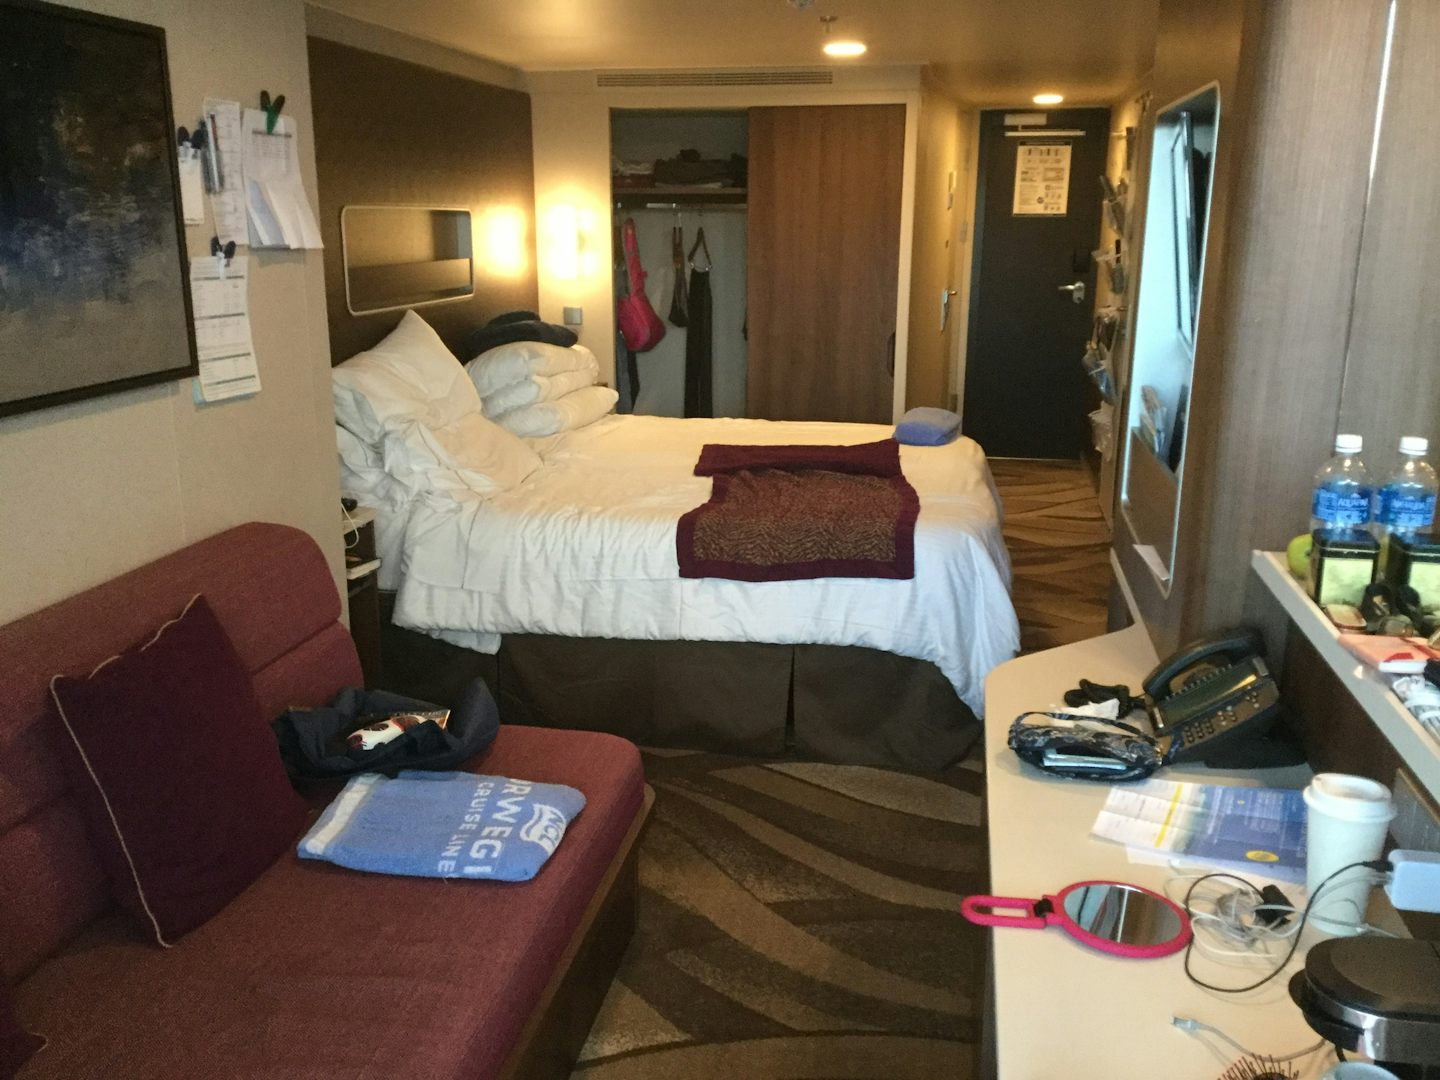 Family mini suite. Very small, same size cabin as regular balcony. Only the